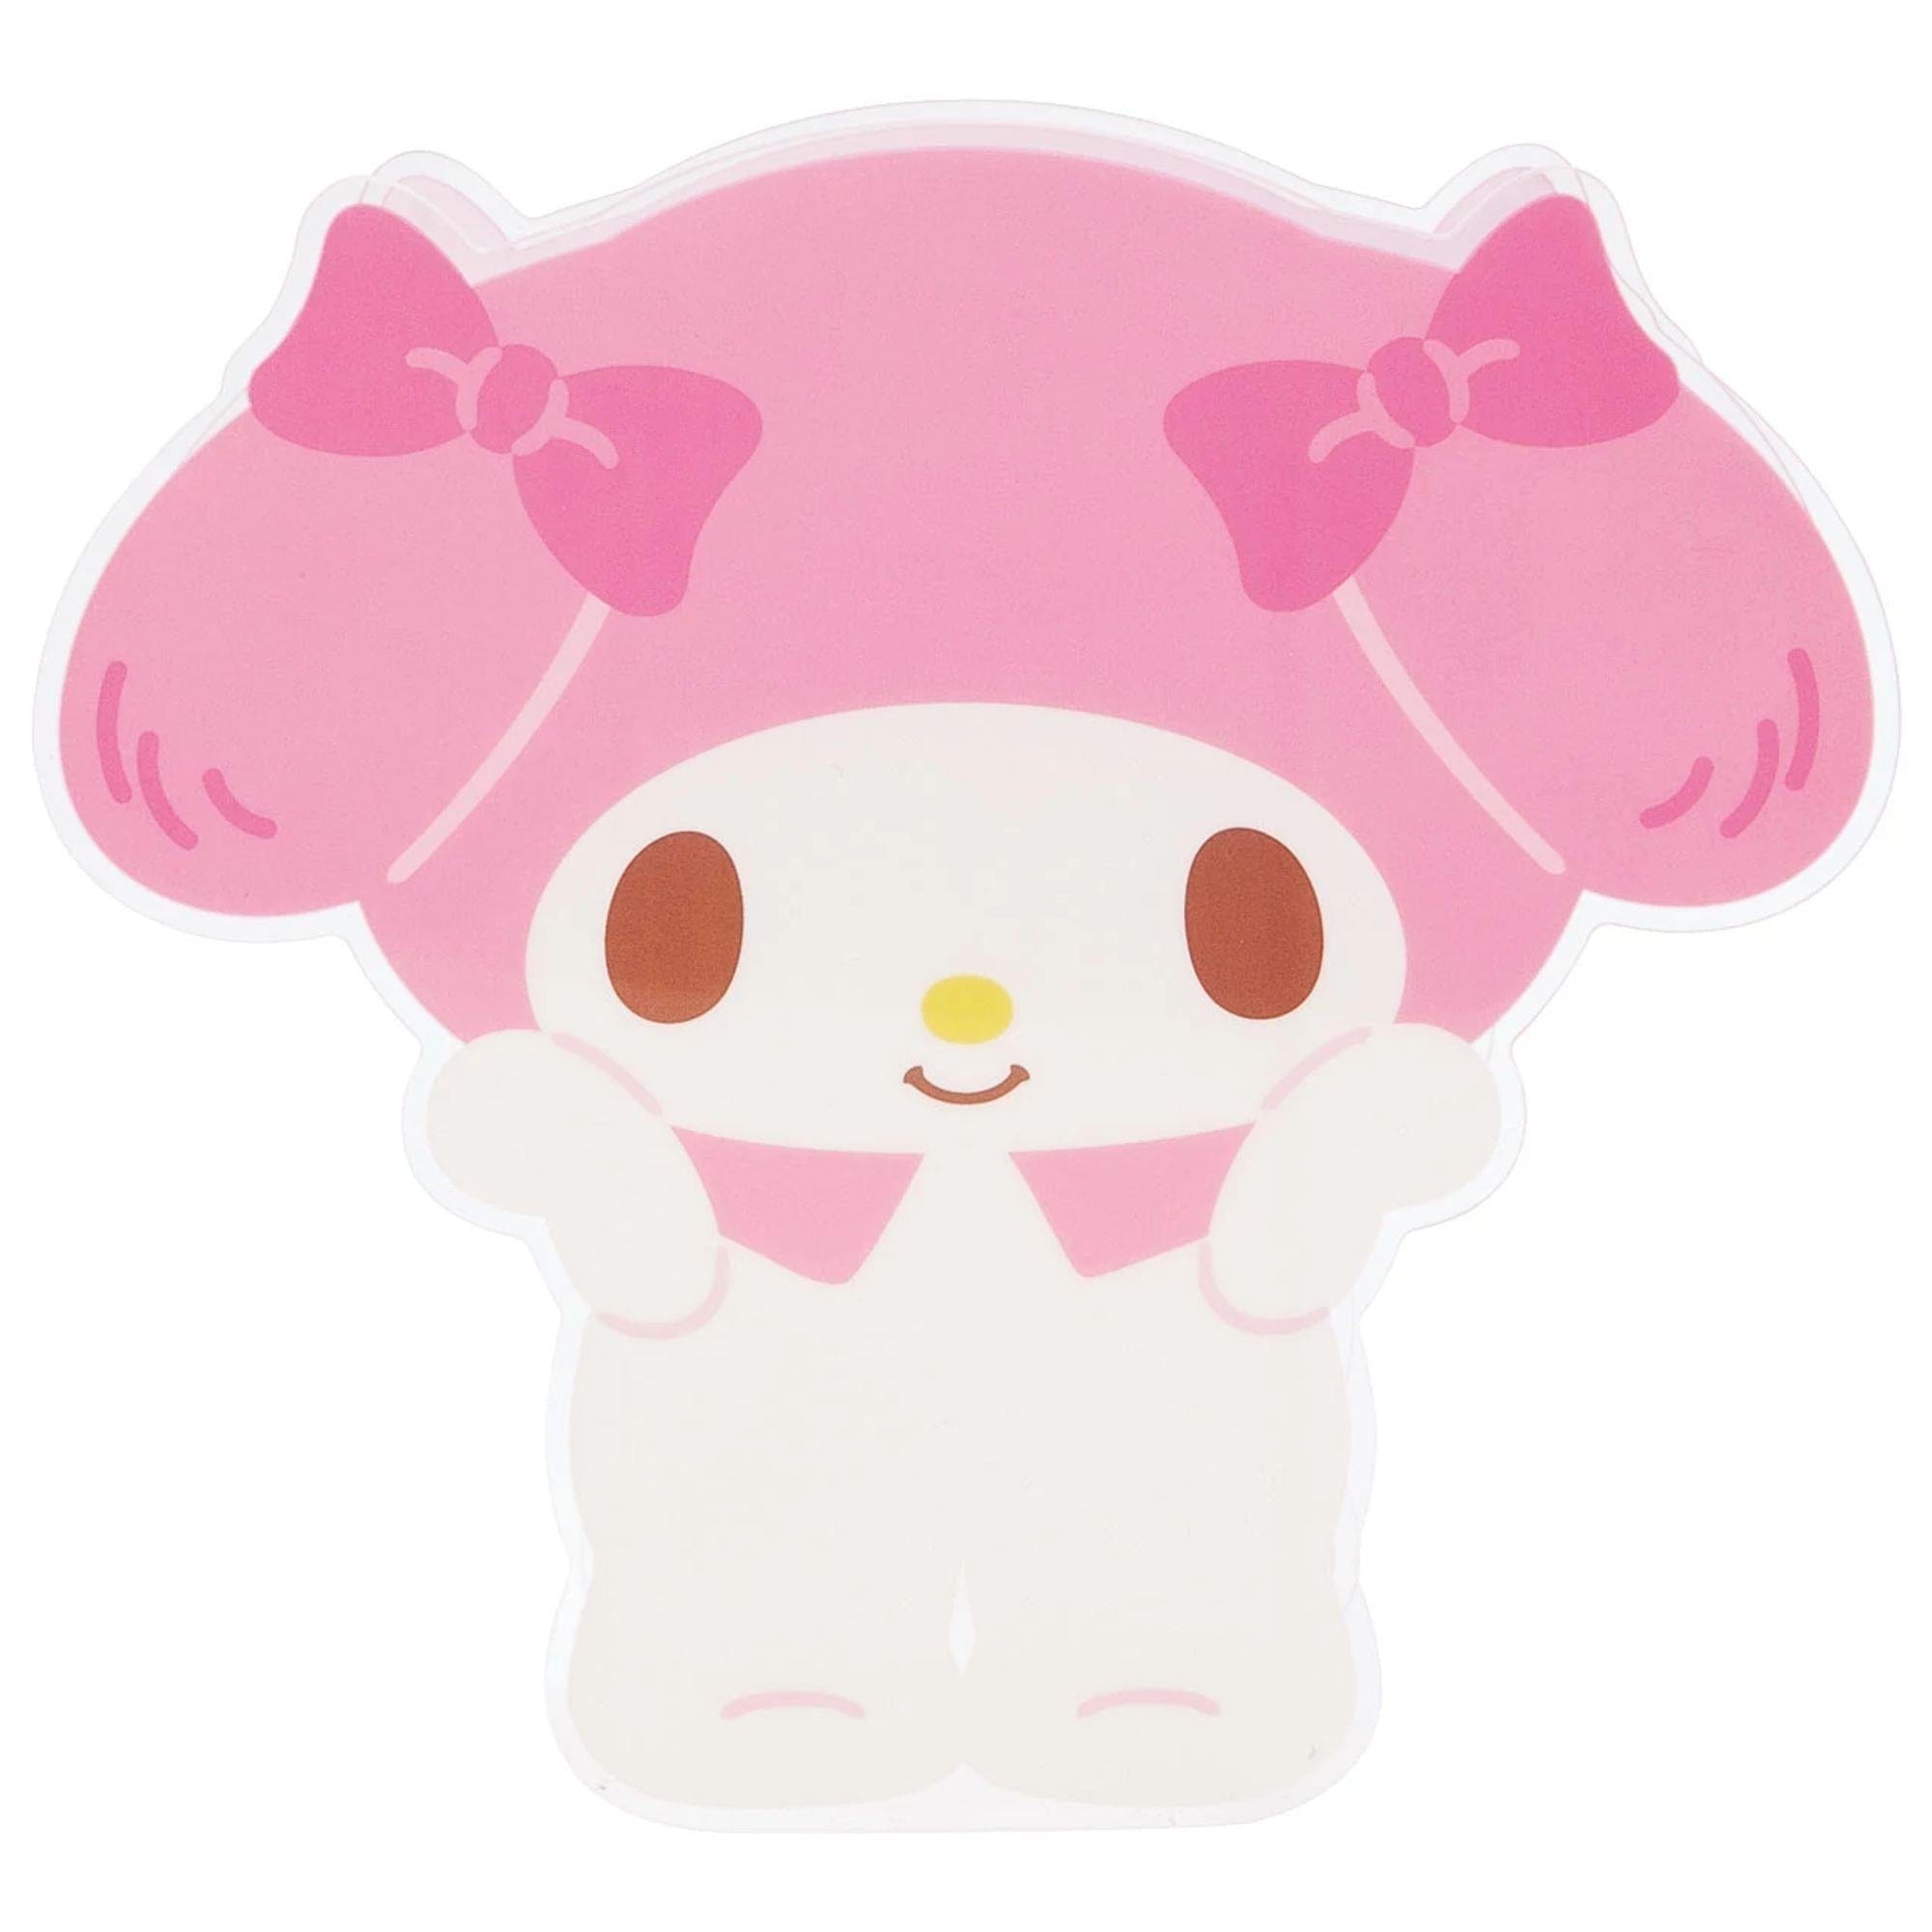 OFFICIAL SANRIO/ My Melody Big Ins Deco Stickers – K Pop Pink Store  [Website]